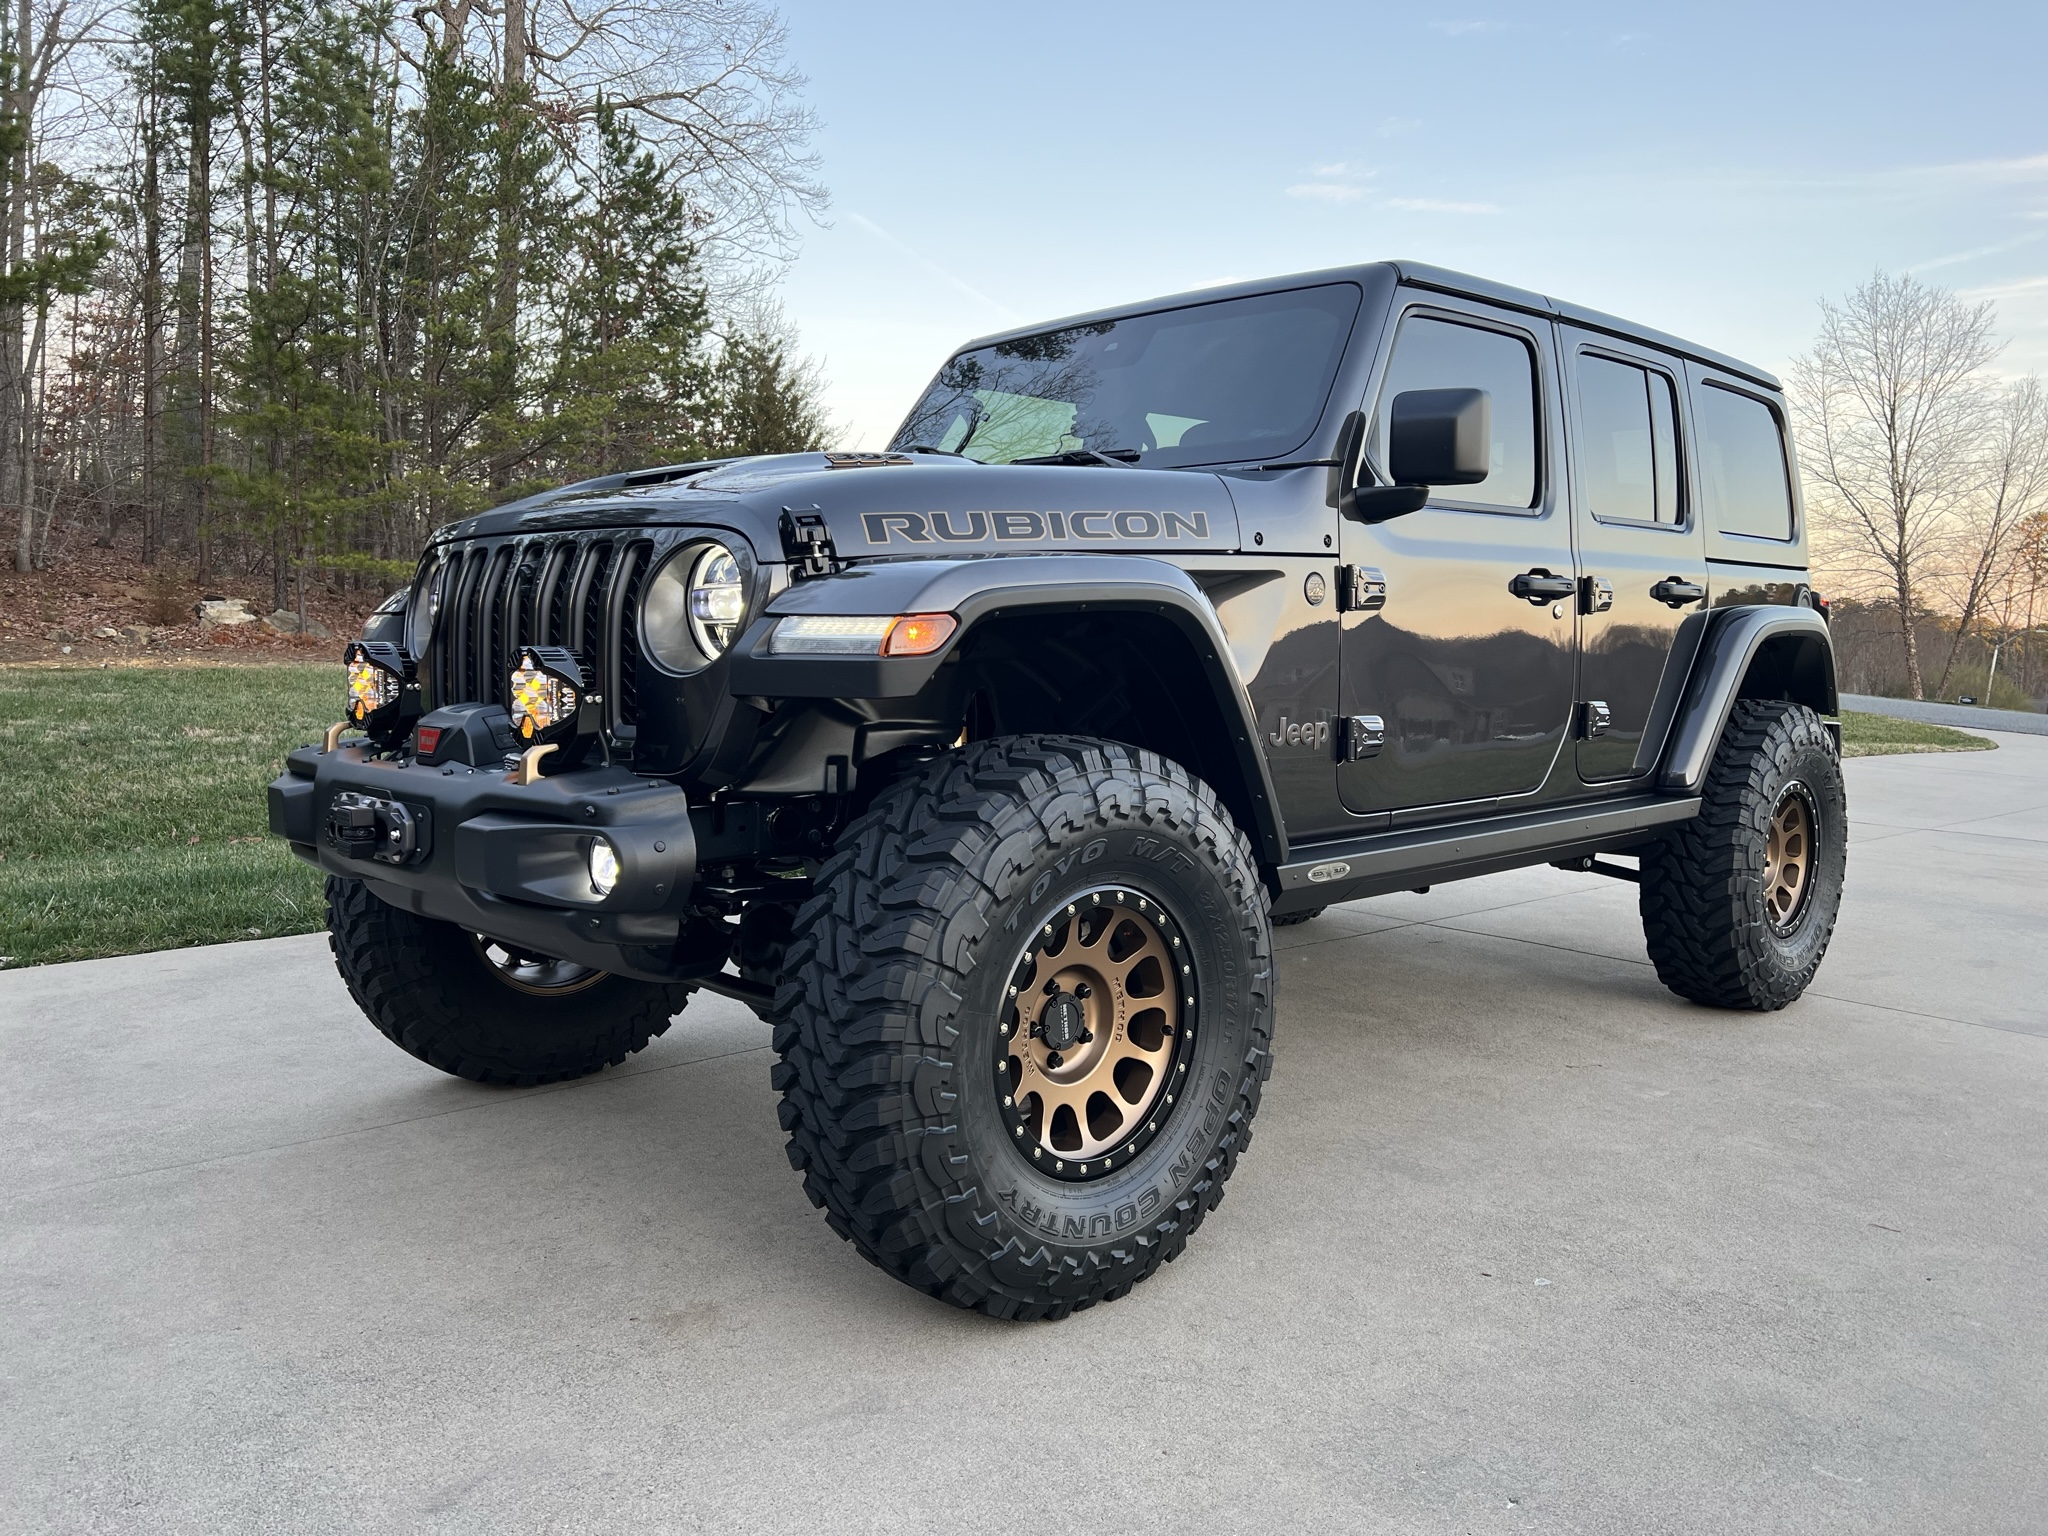 Jeep Wrangler JL 2021 Jeep Rubicon 392 first Vin and order, build and delivery tracking list D6C36F6F-E2AD-436E-9258-D16CFF449D9F